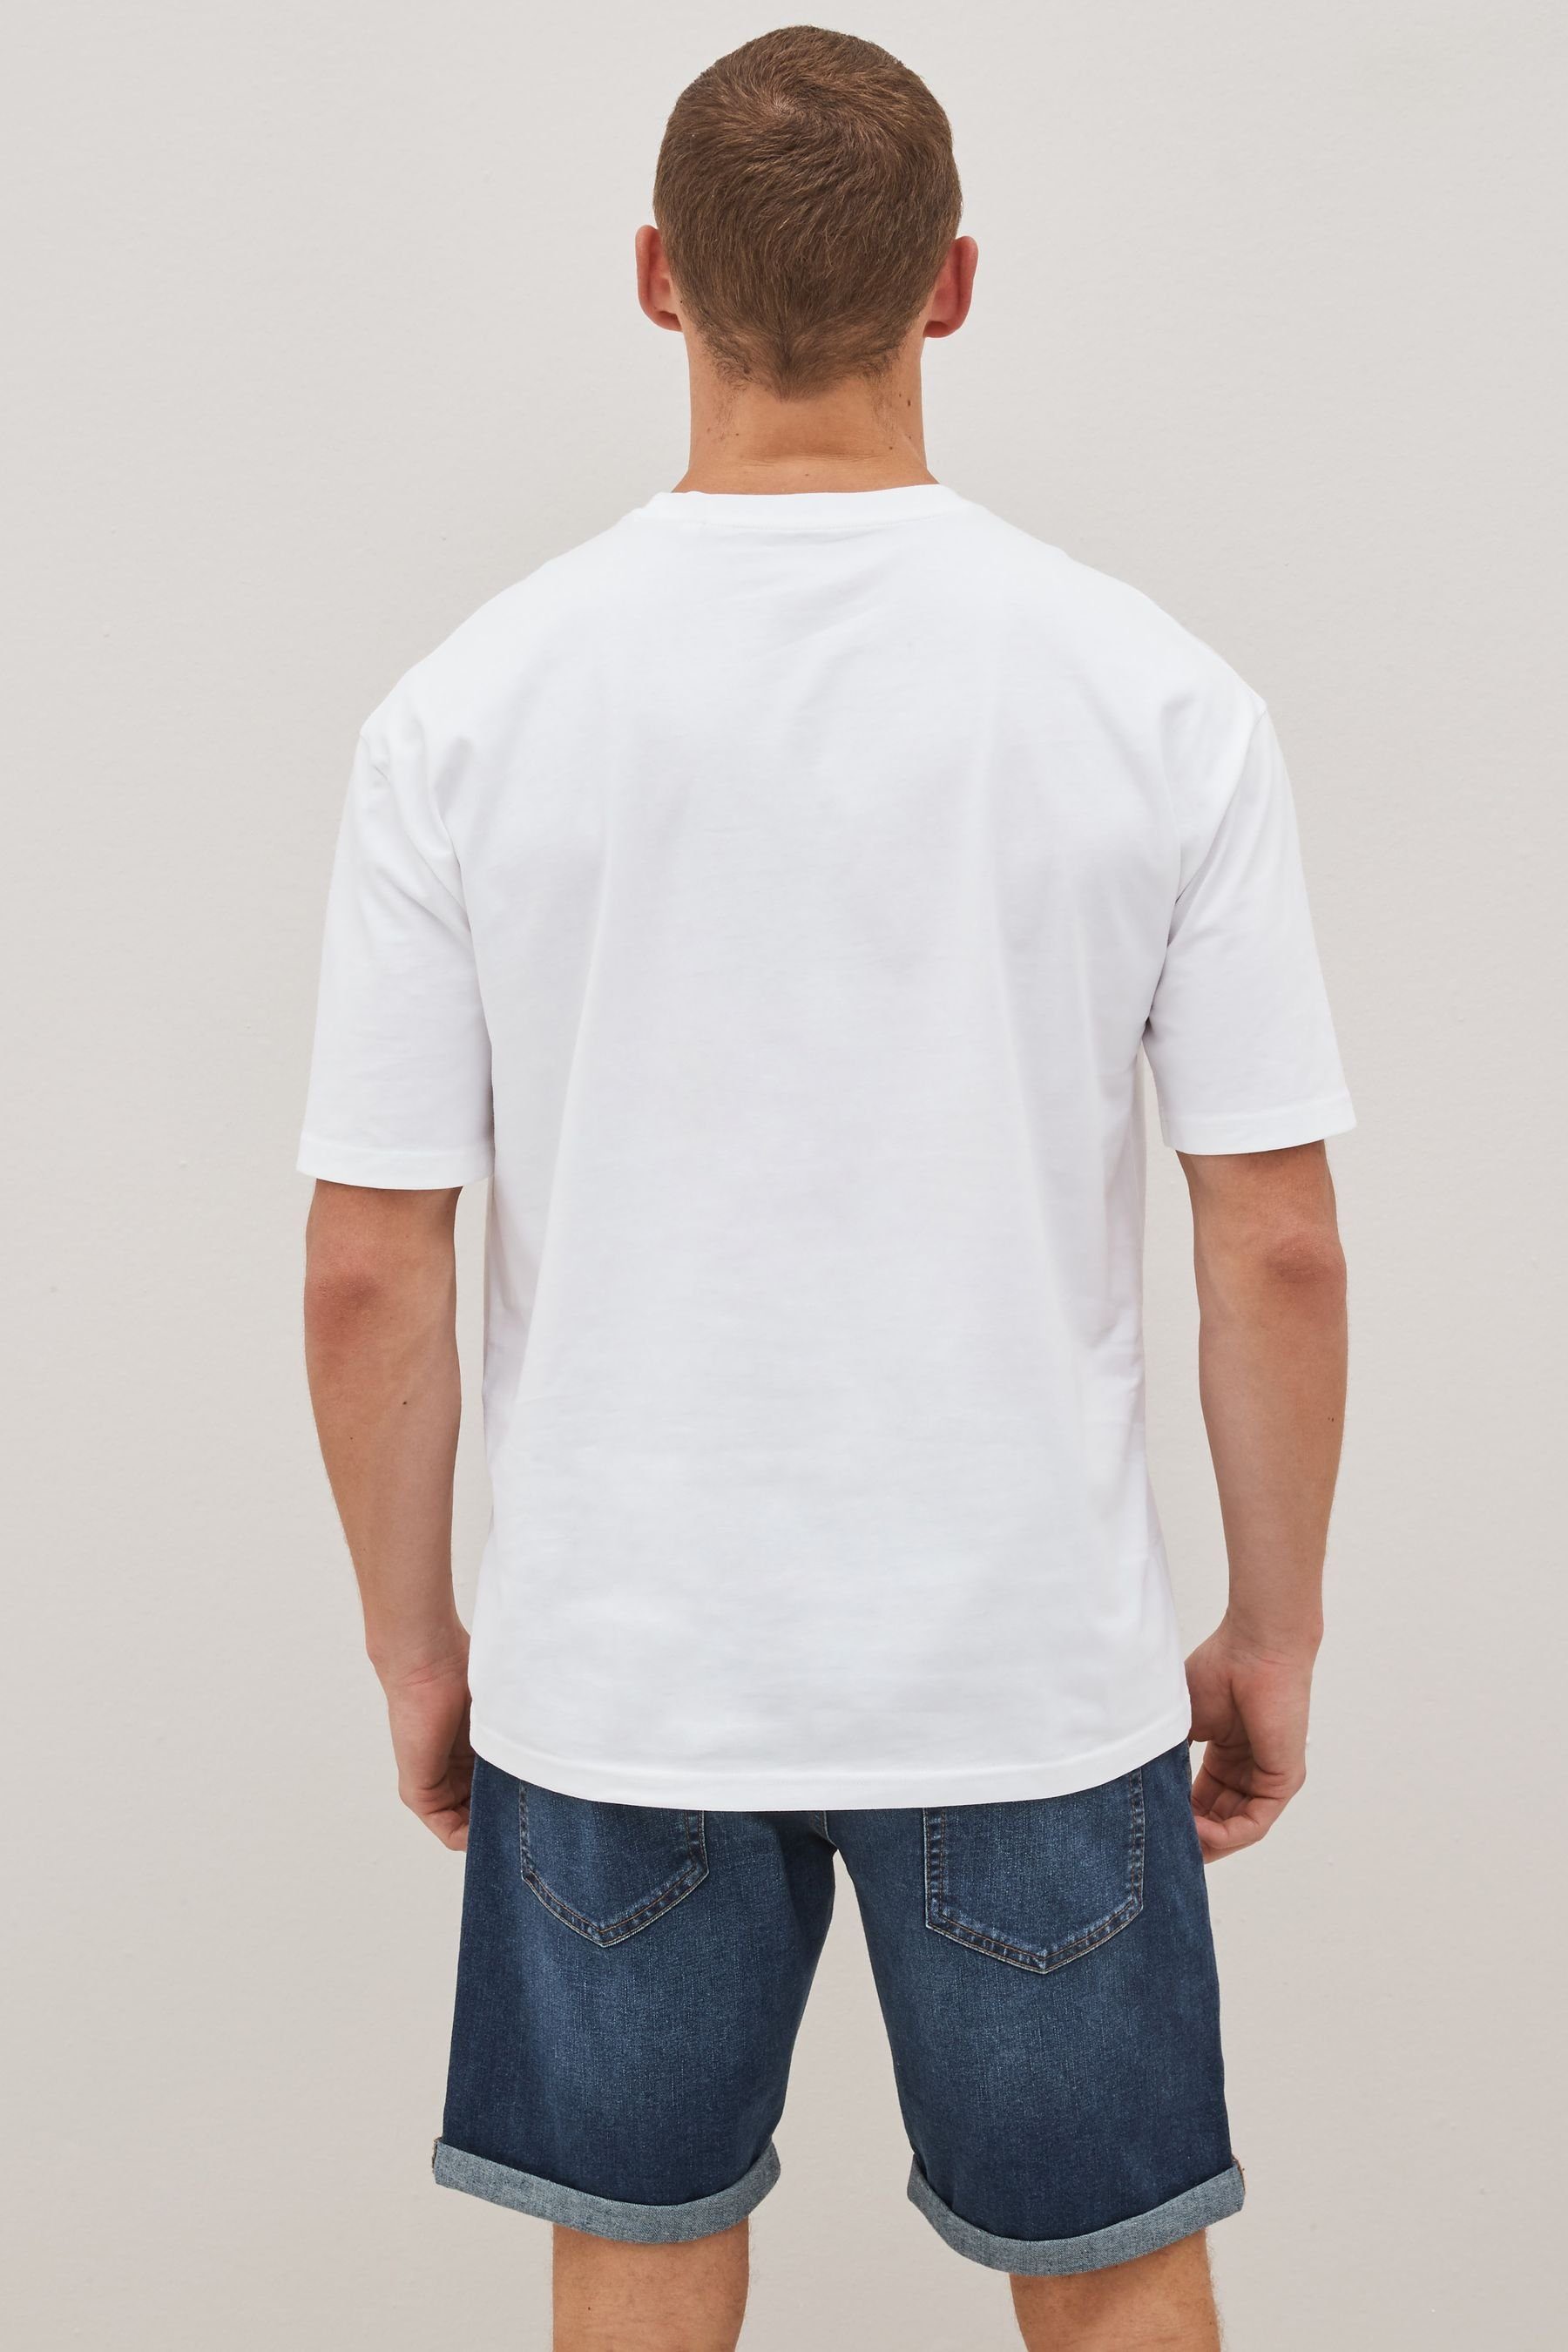 Next Rundhals-T-Shirt Fit Relaxed im White T-Shirt (1-tlg)